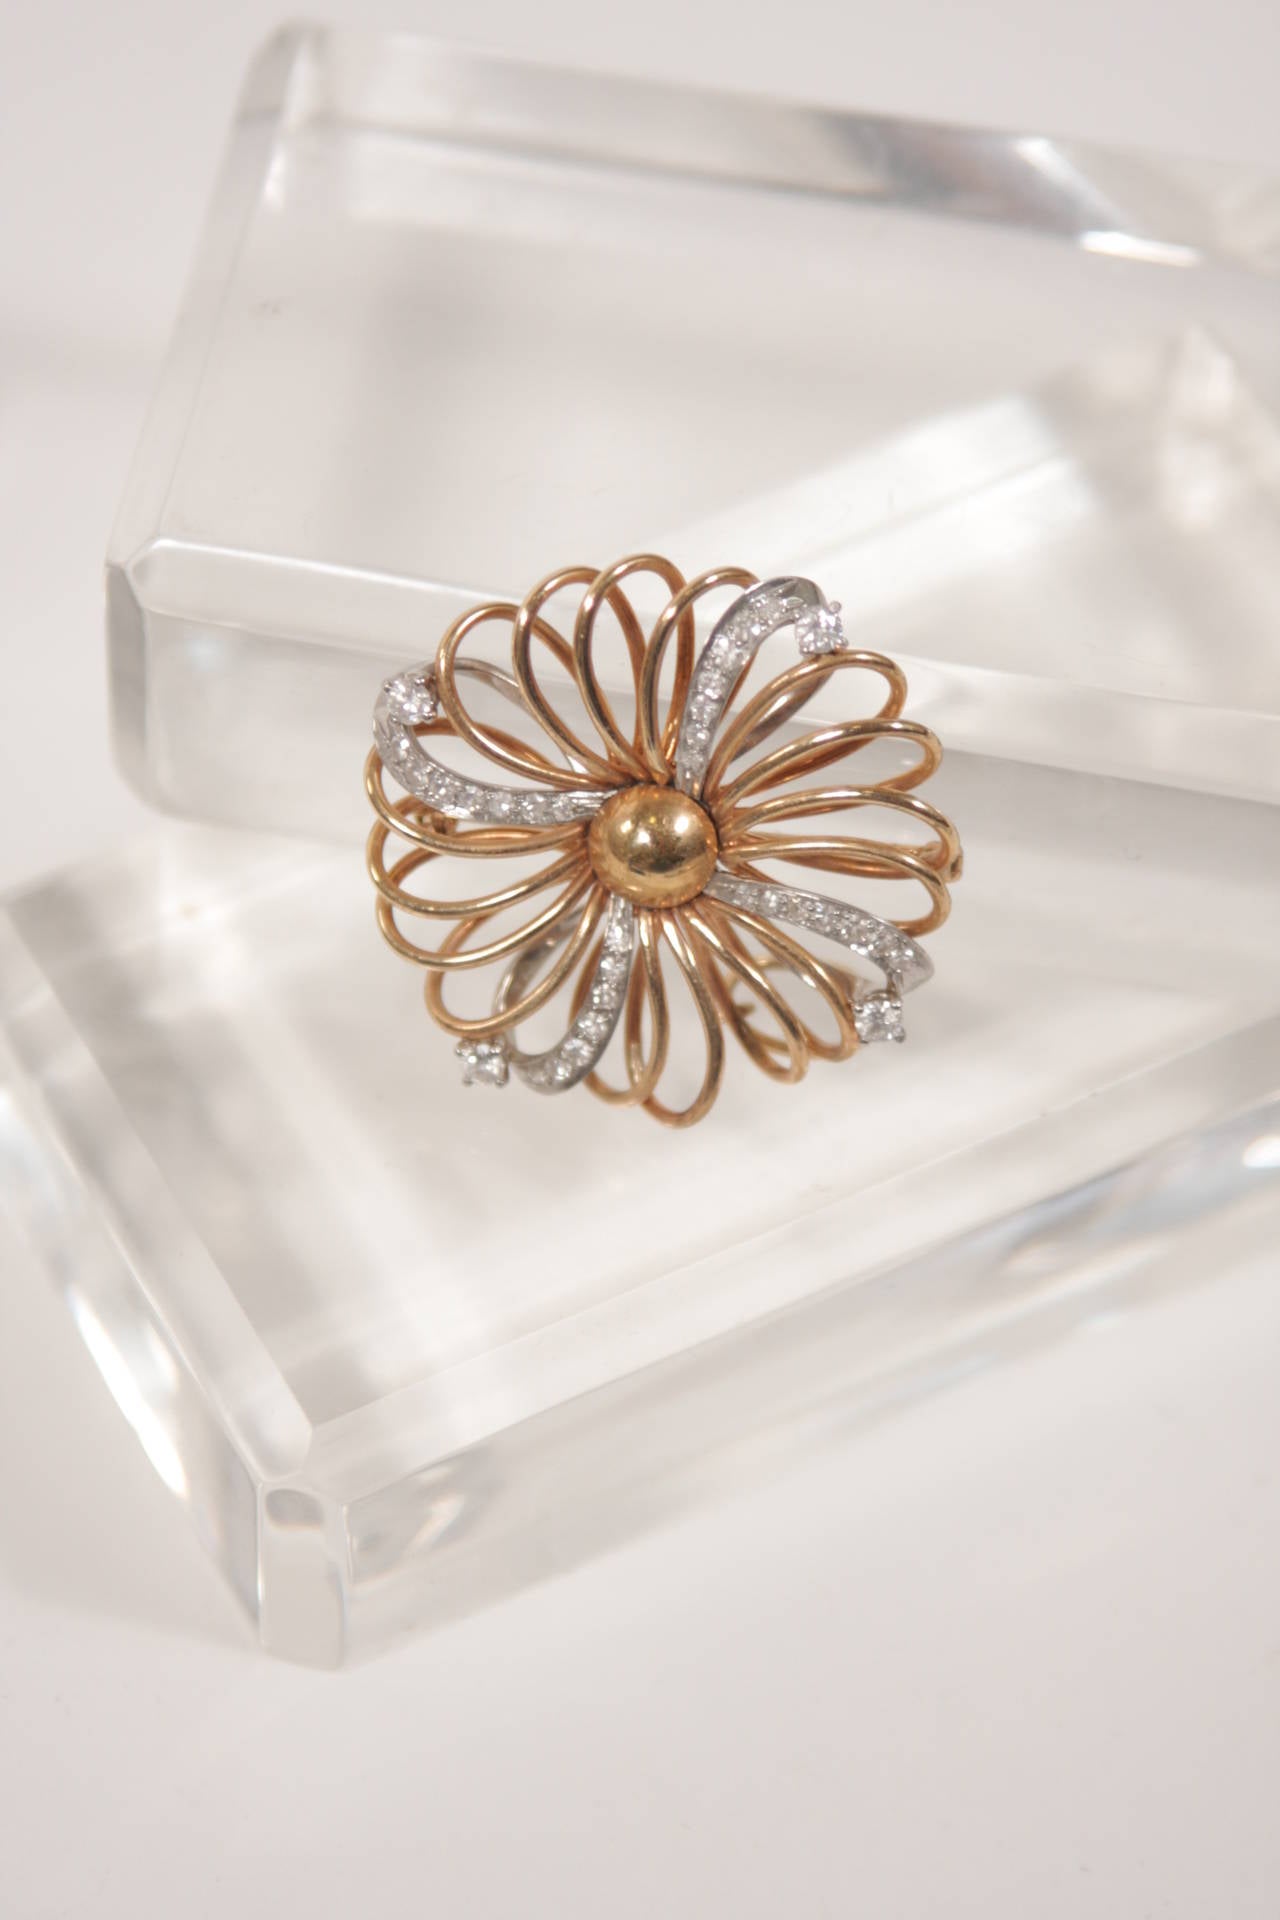 This brooch is available for viewing at our Beverly Hills Boutique. The brooch is composed of 14k yellow and white gold with diamonds. It features an abstract floral design. Measures 1 3/8